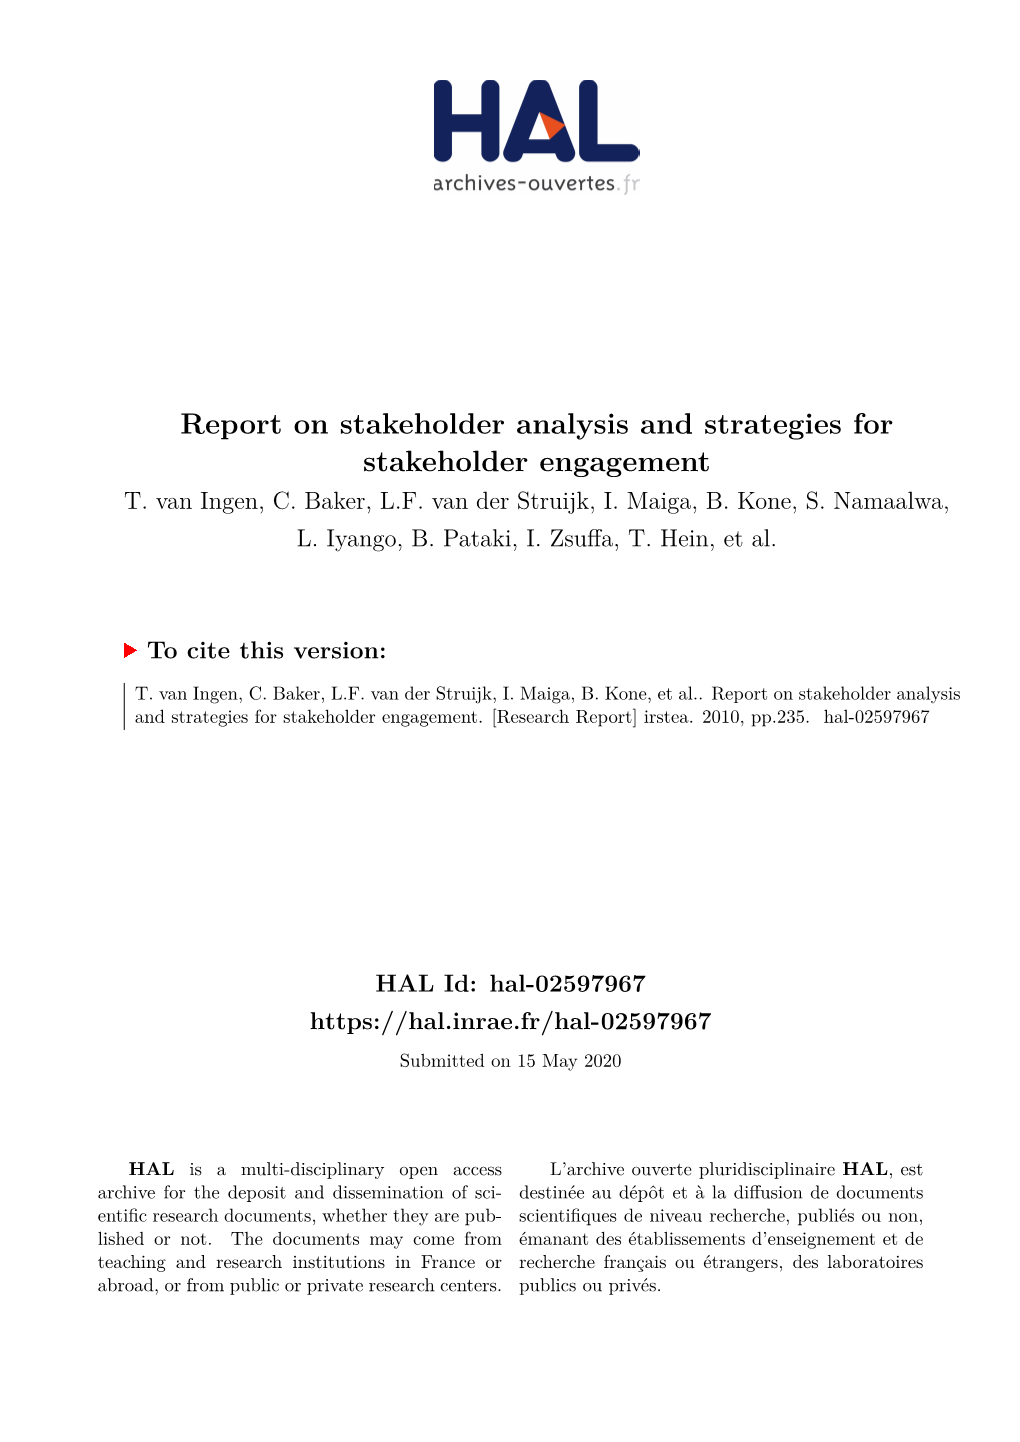 Report on Stakeholder Analysis and Strategies for Stakeholder Engagement T